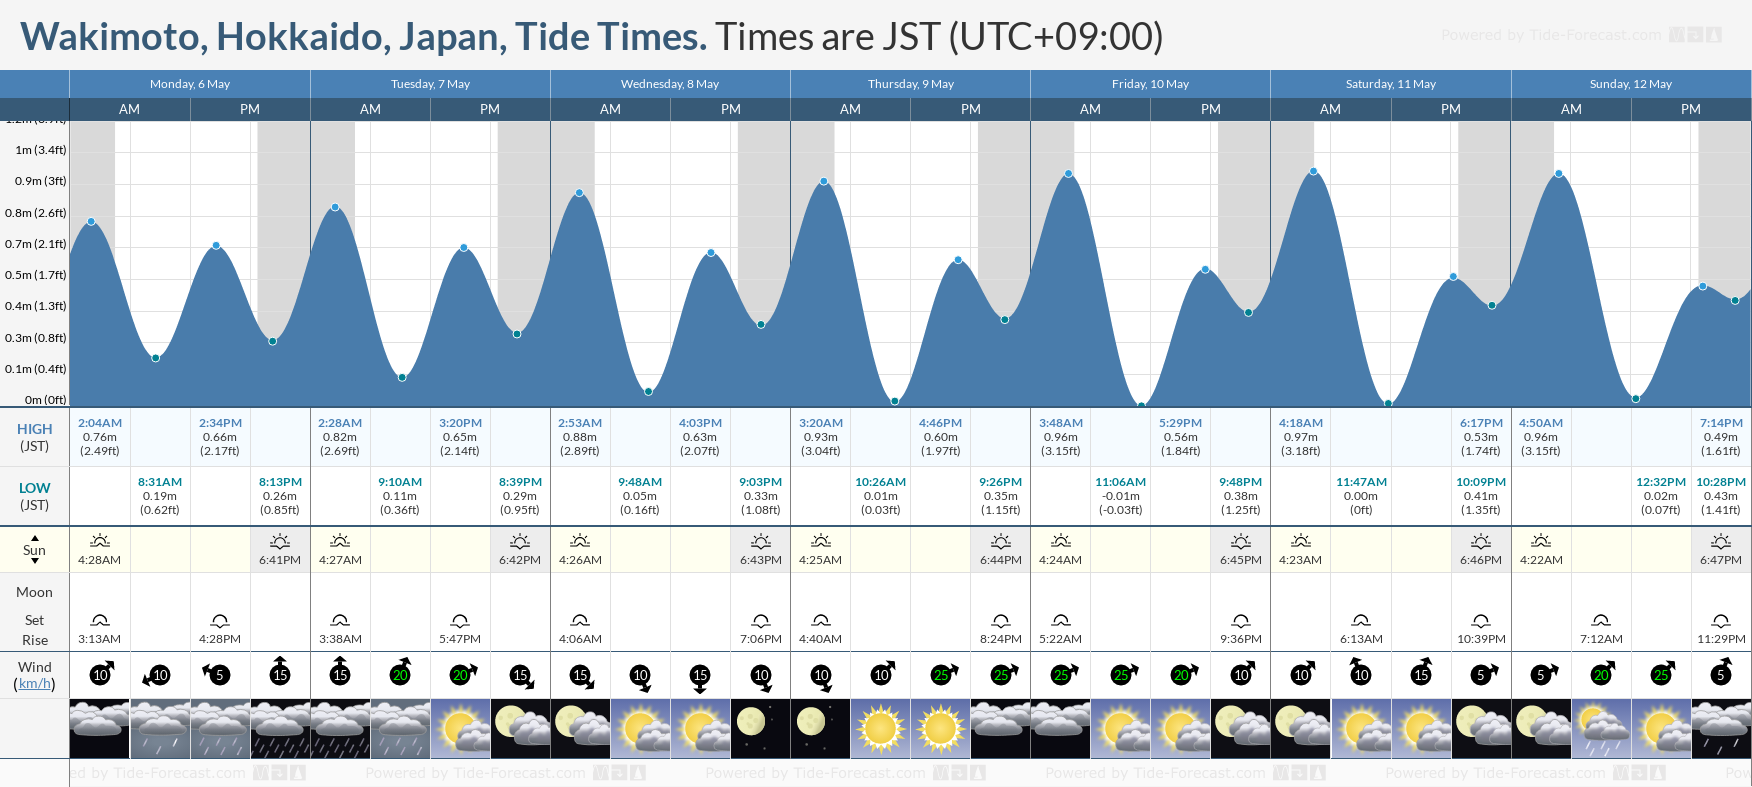 Wakimoto, Hokkaido, Japan Tide Chart including high and low tide tide times for the next 7 days